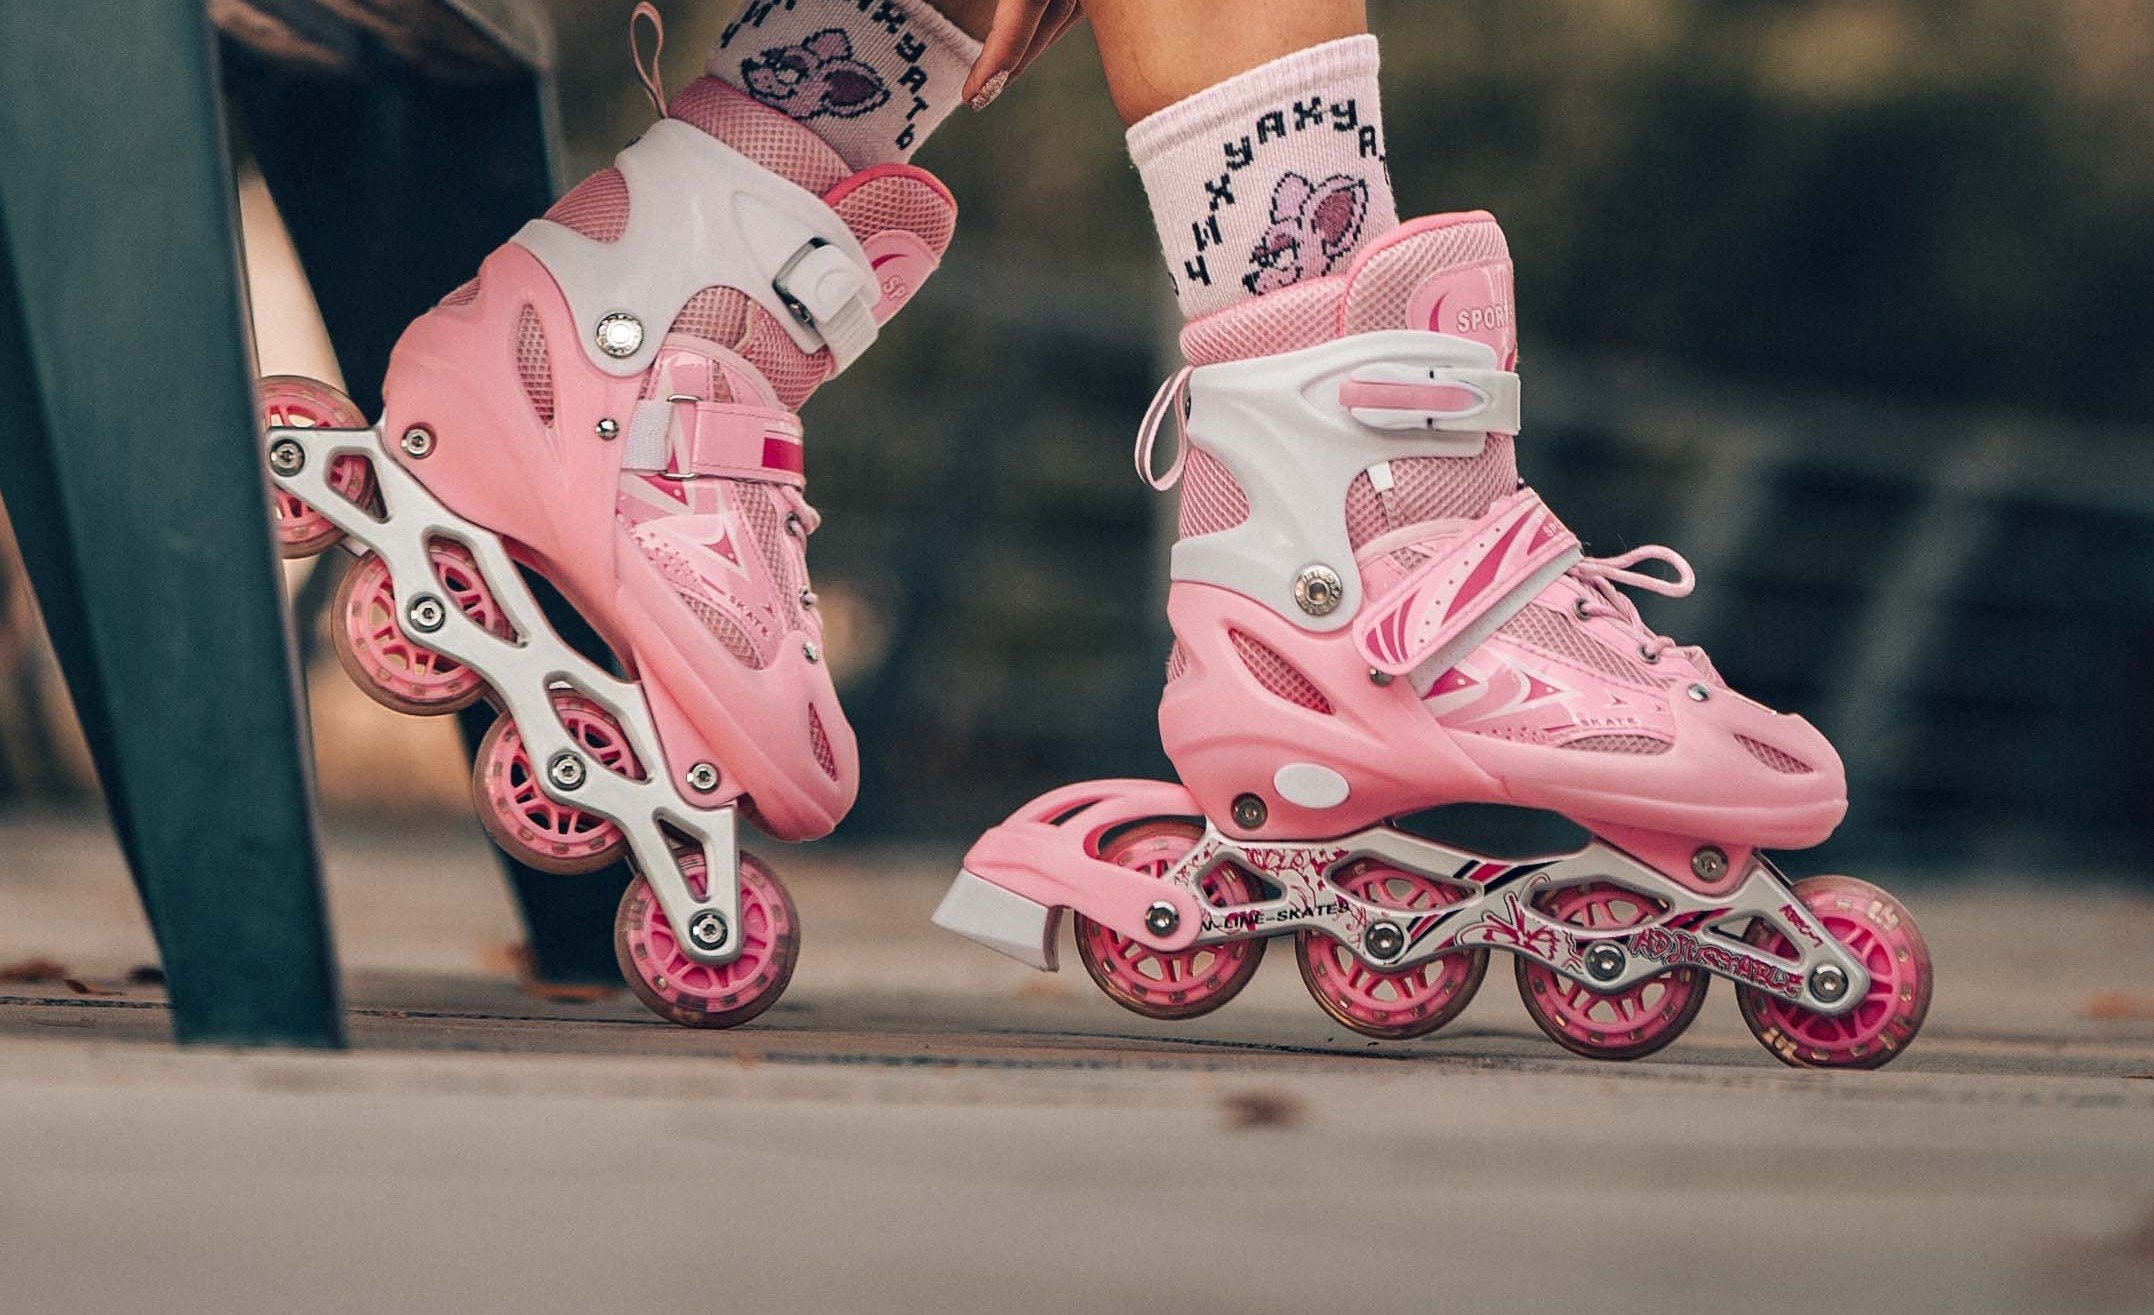 Lucy wanted a very expensive pair of skates. | Source: Unsplash